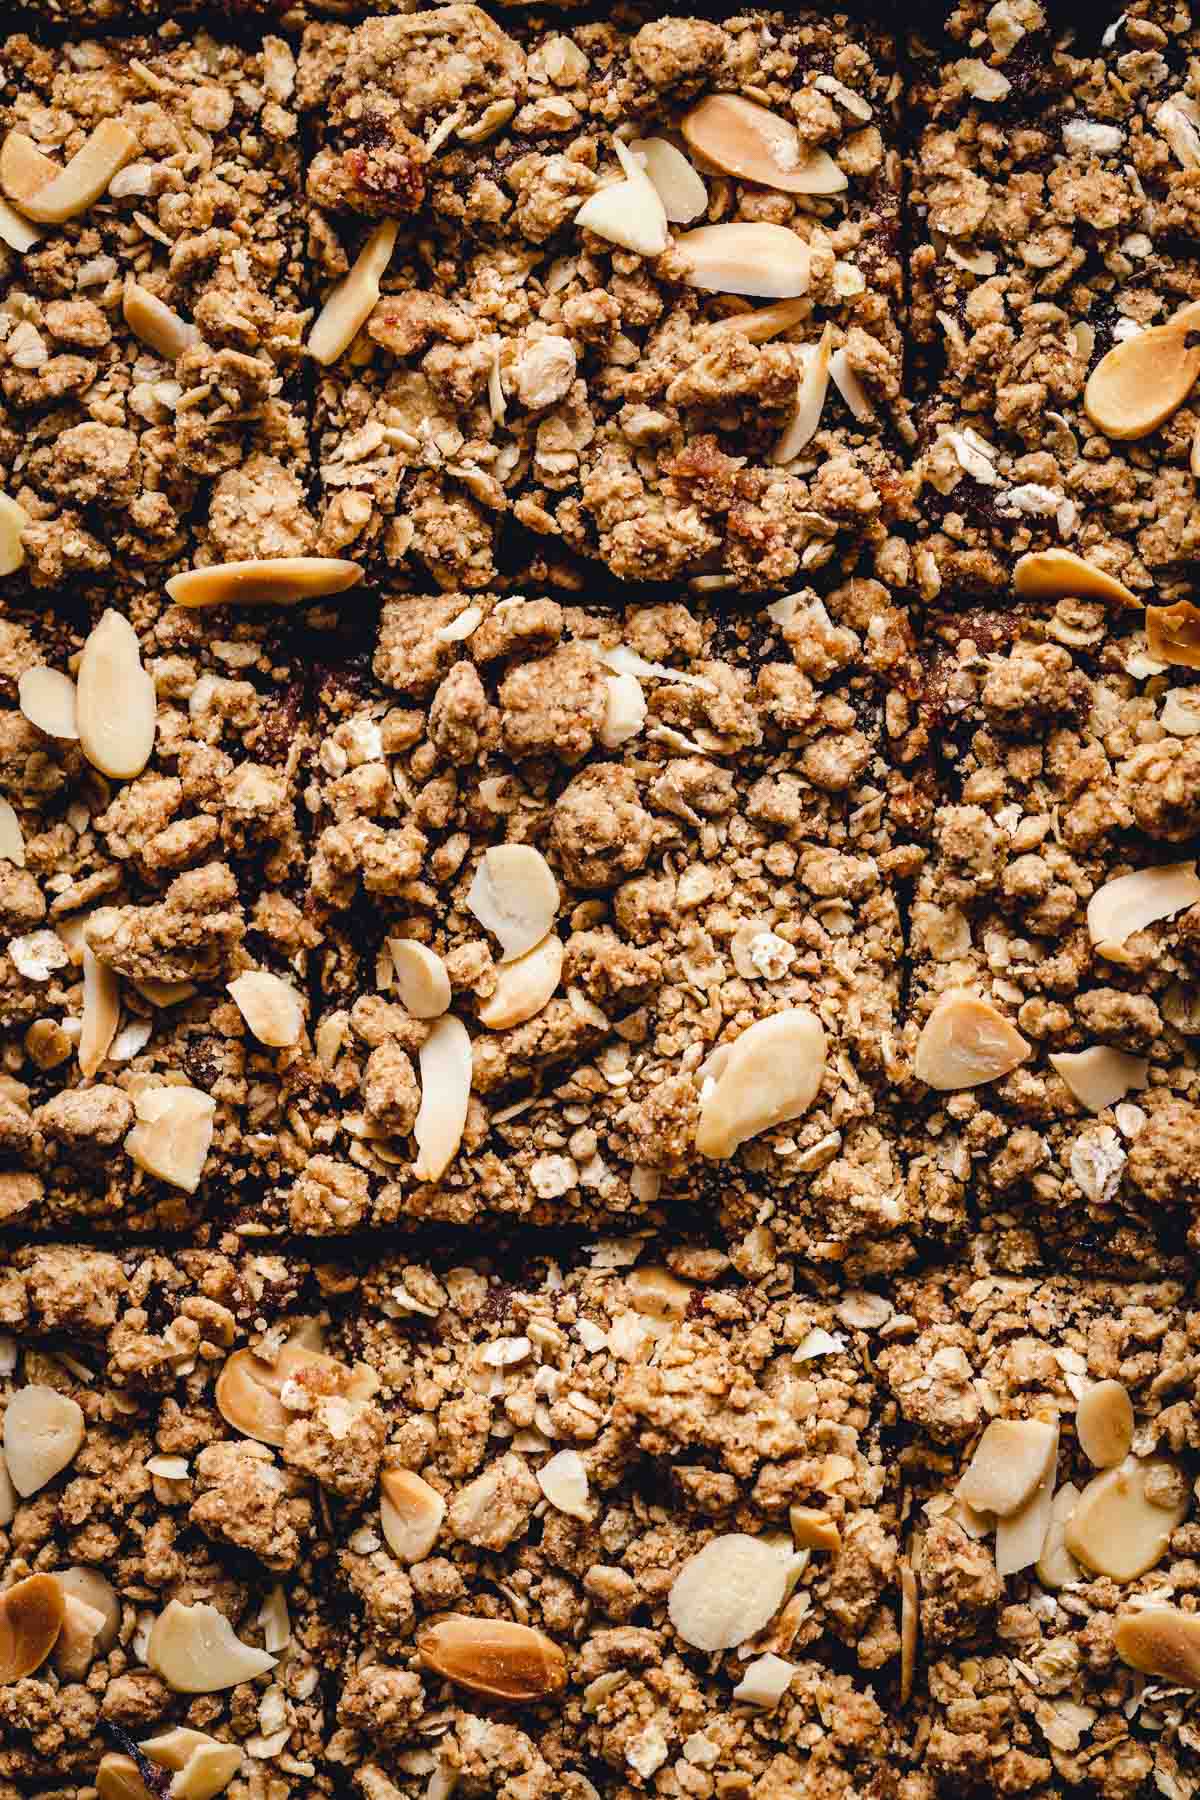 A close-up image of the oat crumble topping slices.